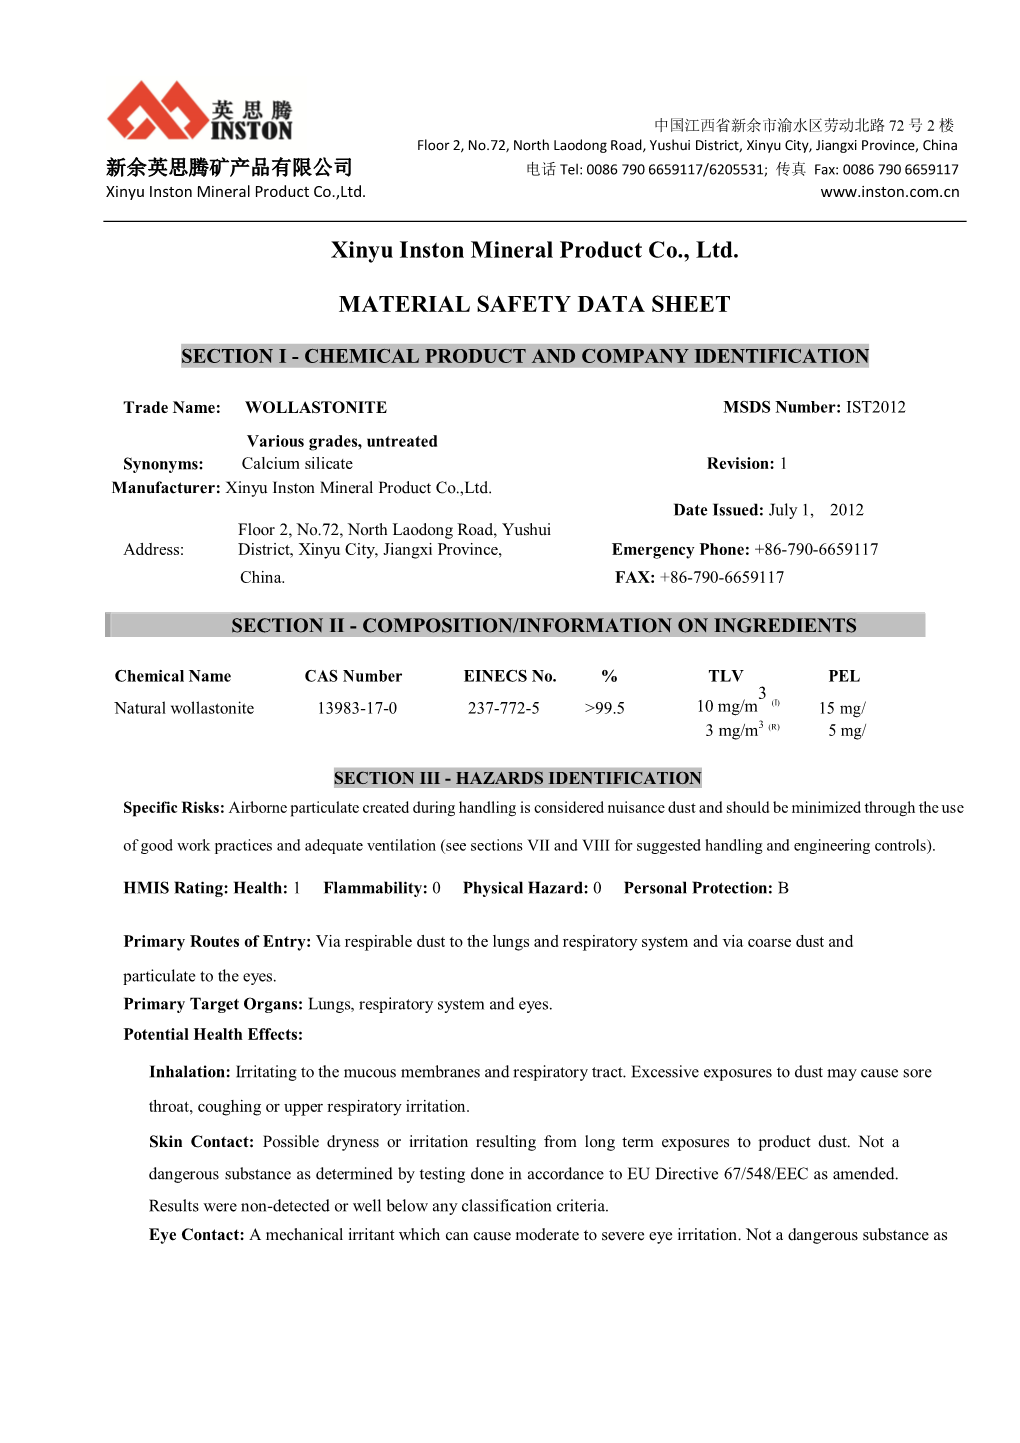 Xinyu Inston Mineral Product Co., Ltd. MATERIAL SAFETY DATA SHEET